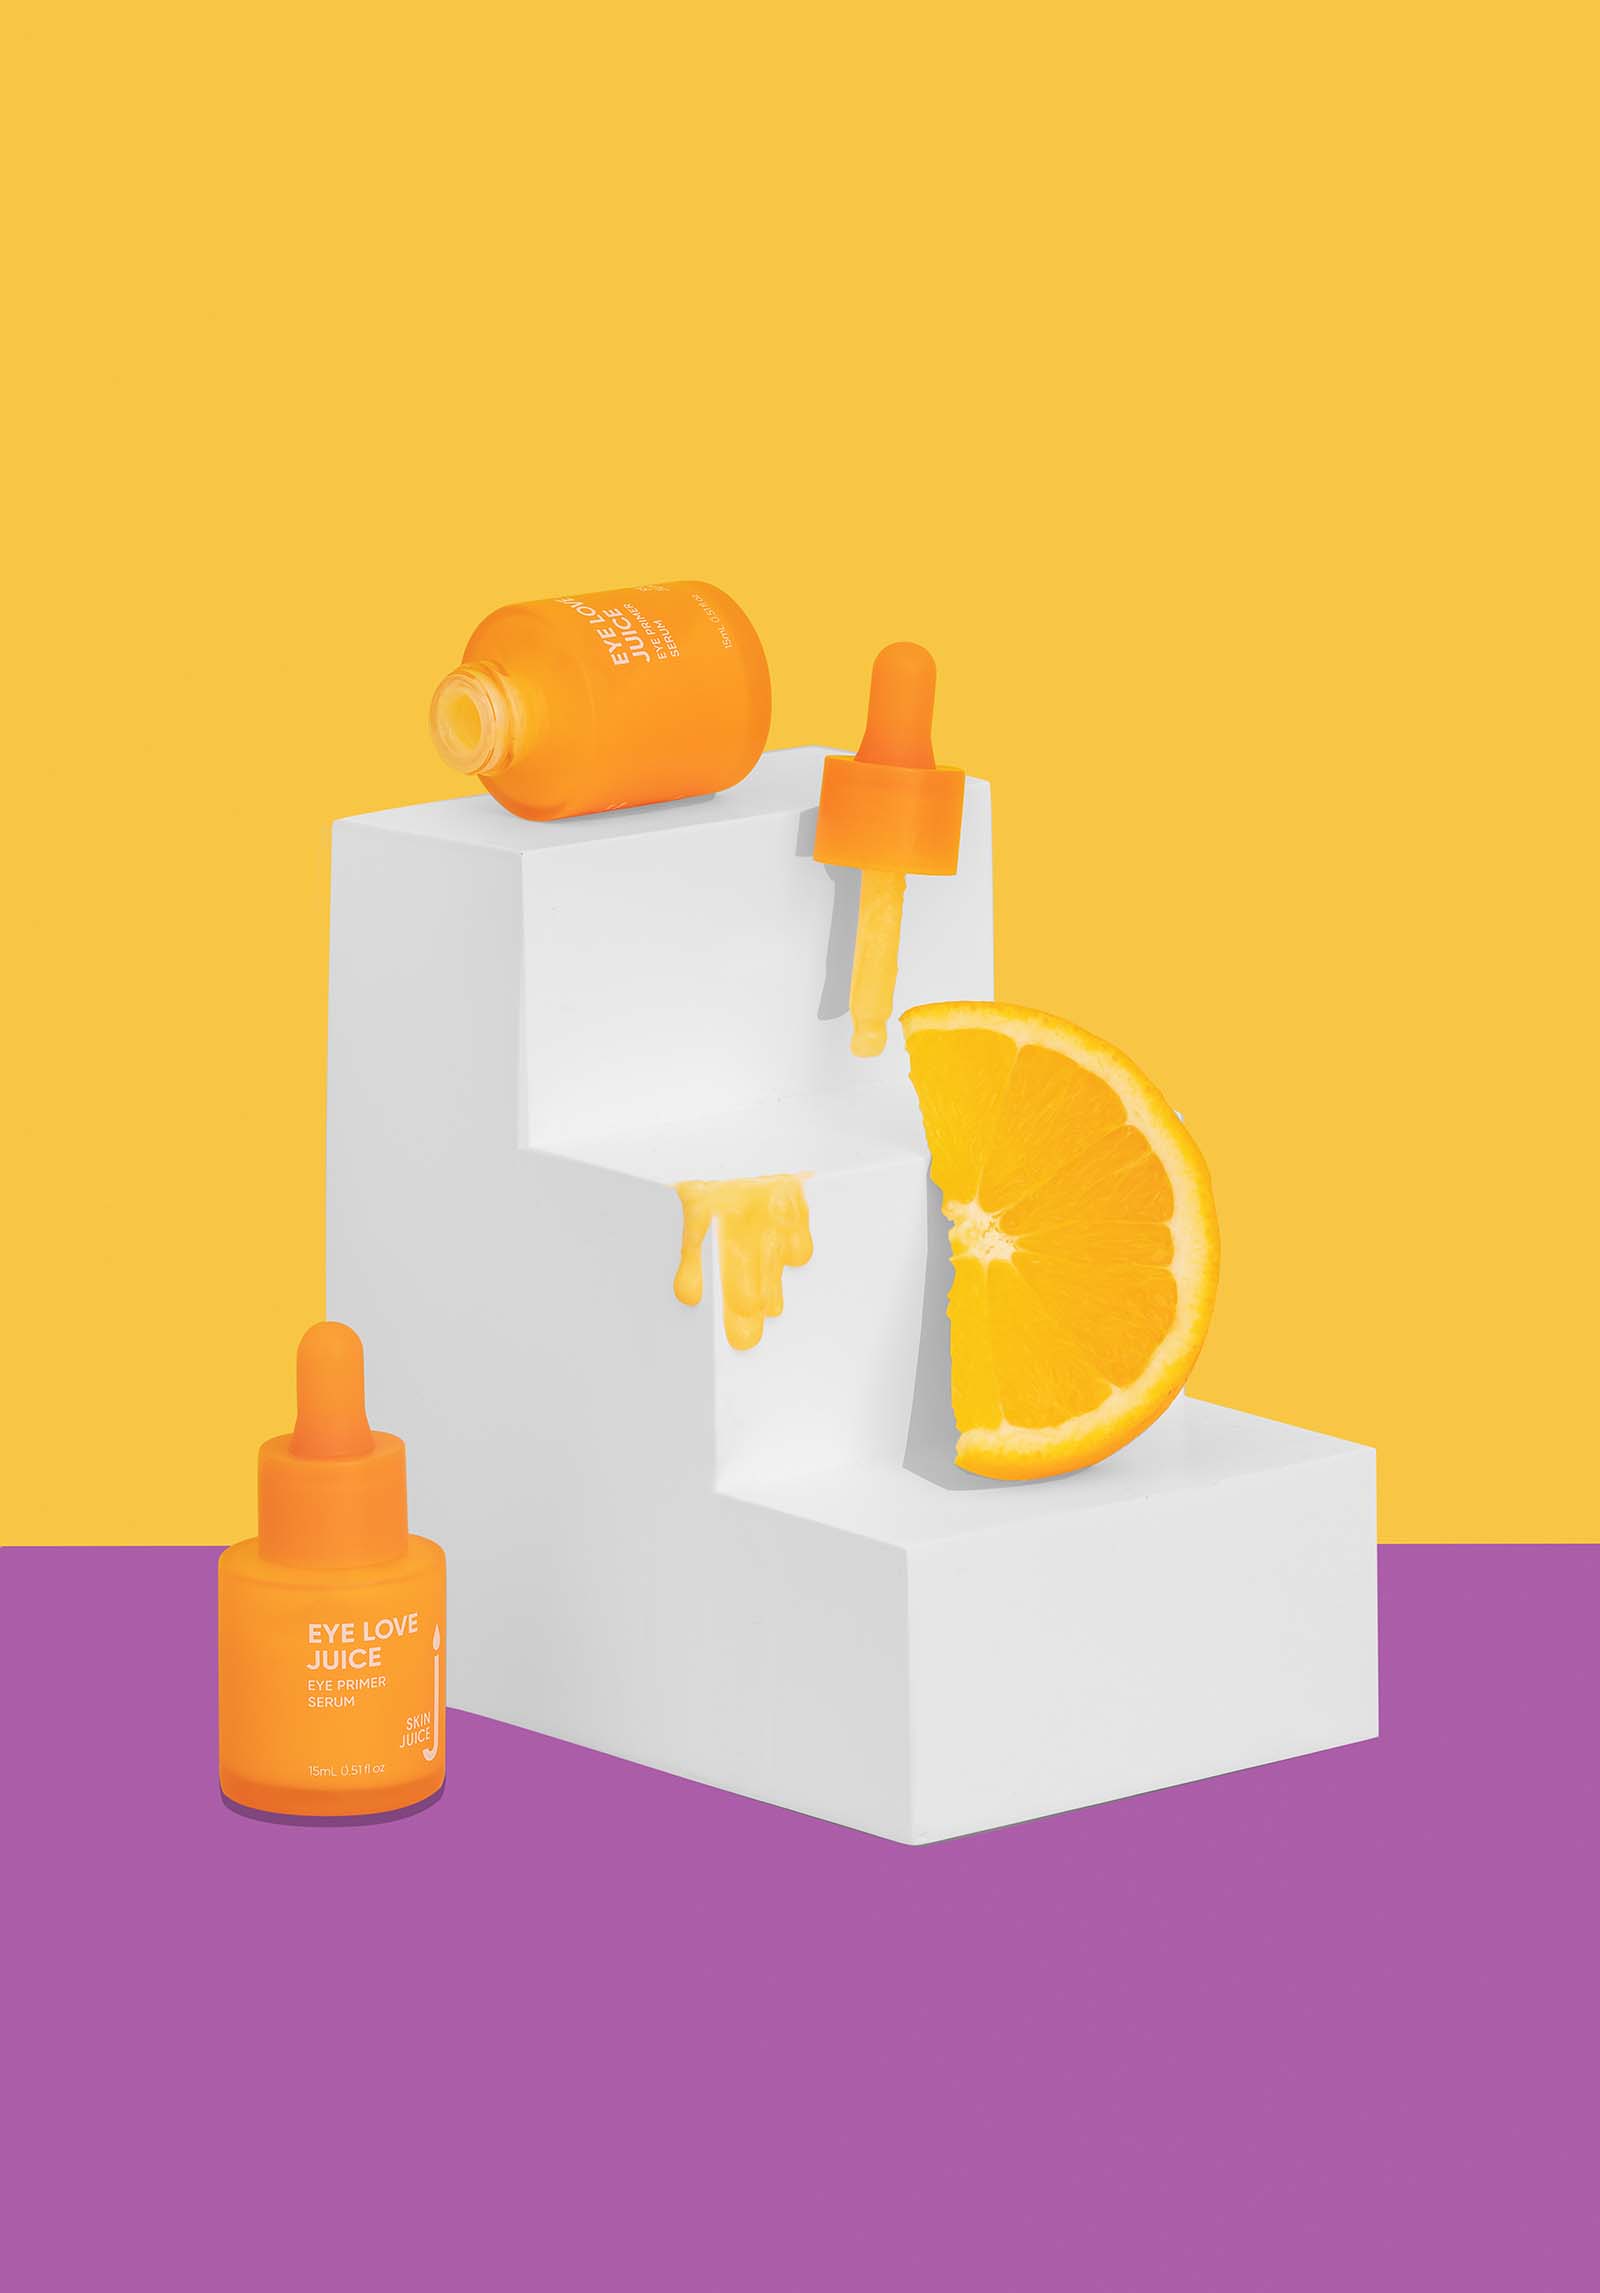 colourful product photography for skincare brand skin juice. Styled product photo by colourpop studio 